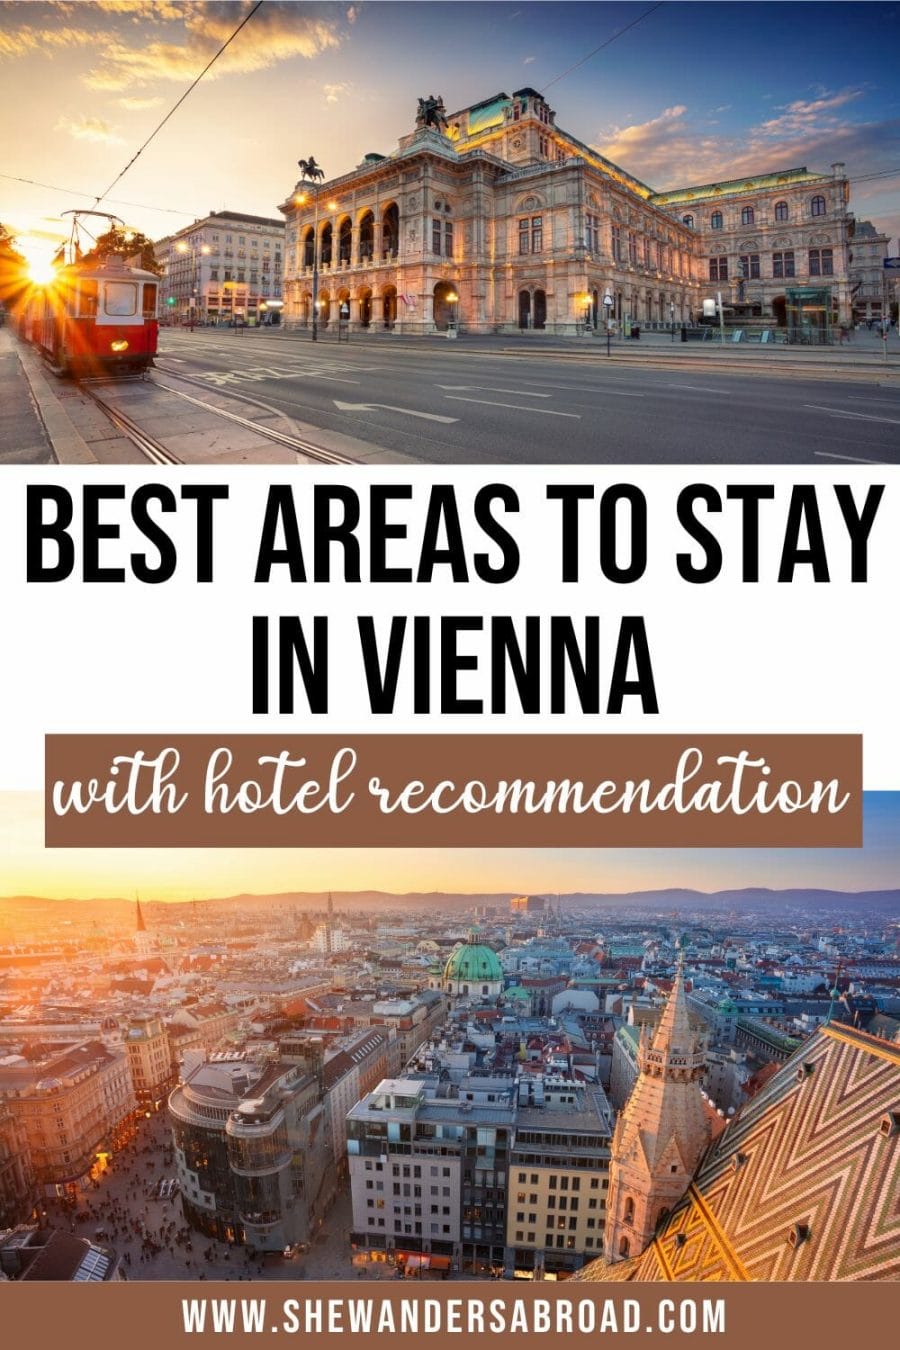 Where to Stay in Vienna: 7 Best Areas & Hotels